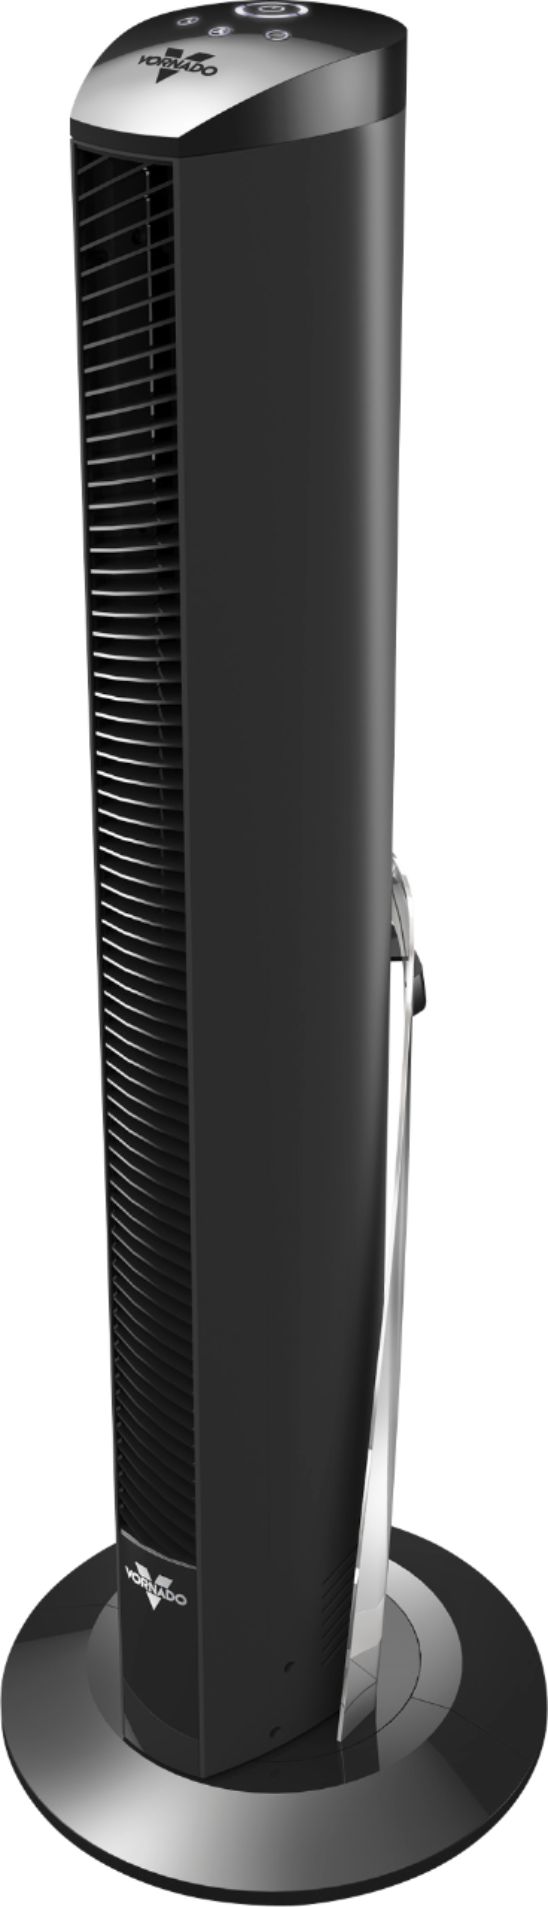 Angle View: Vornado - OSCR37 Oscillating Tower Fan with Remote - Black